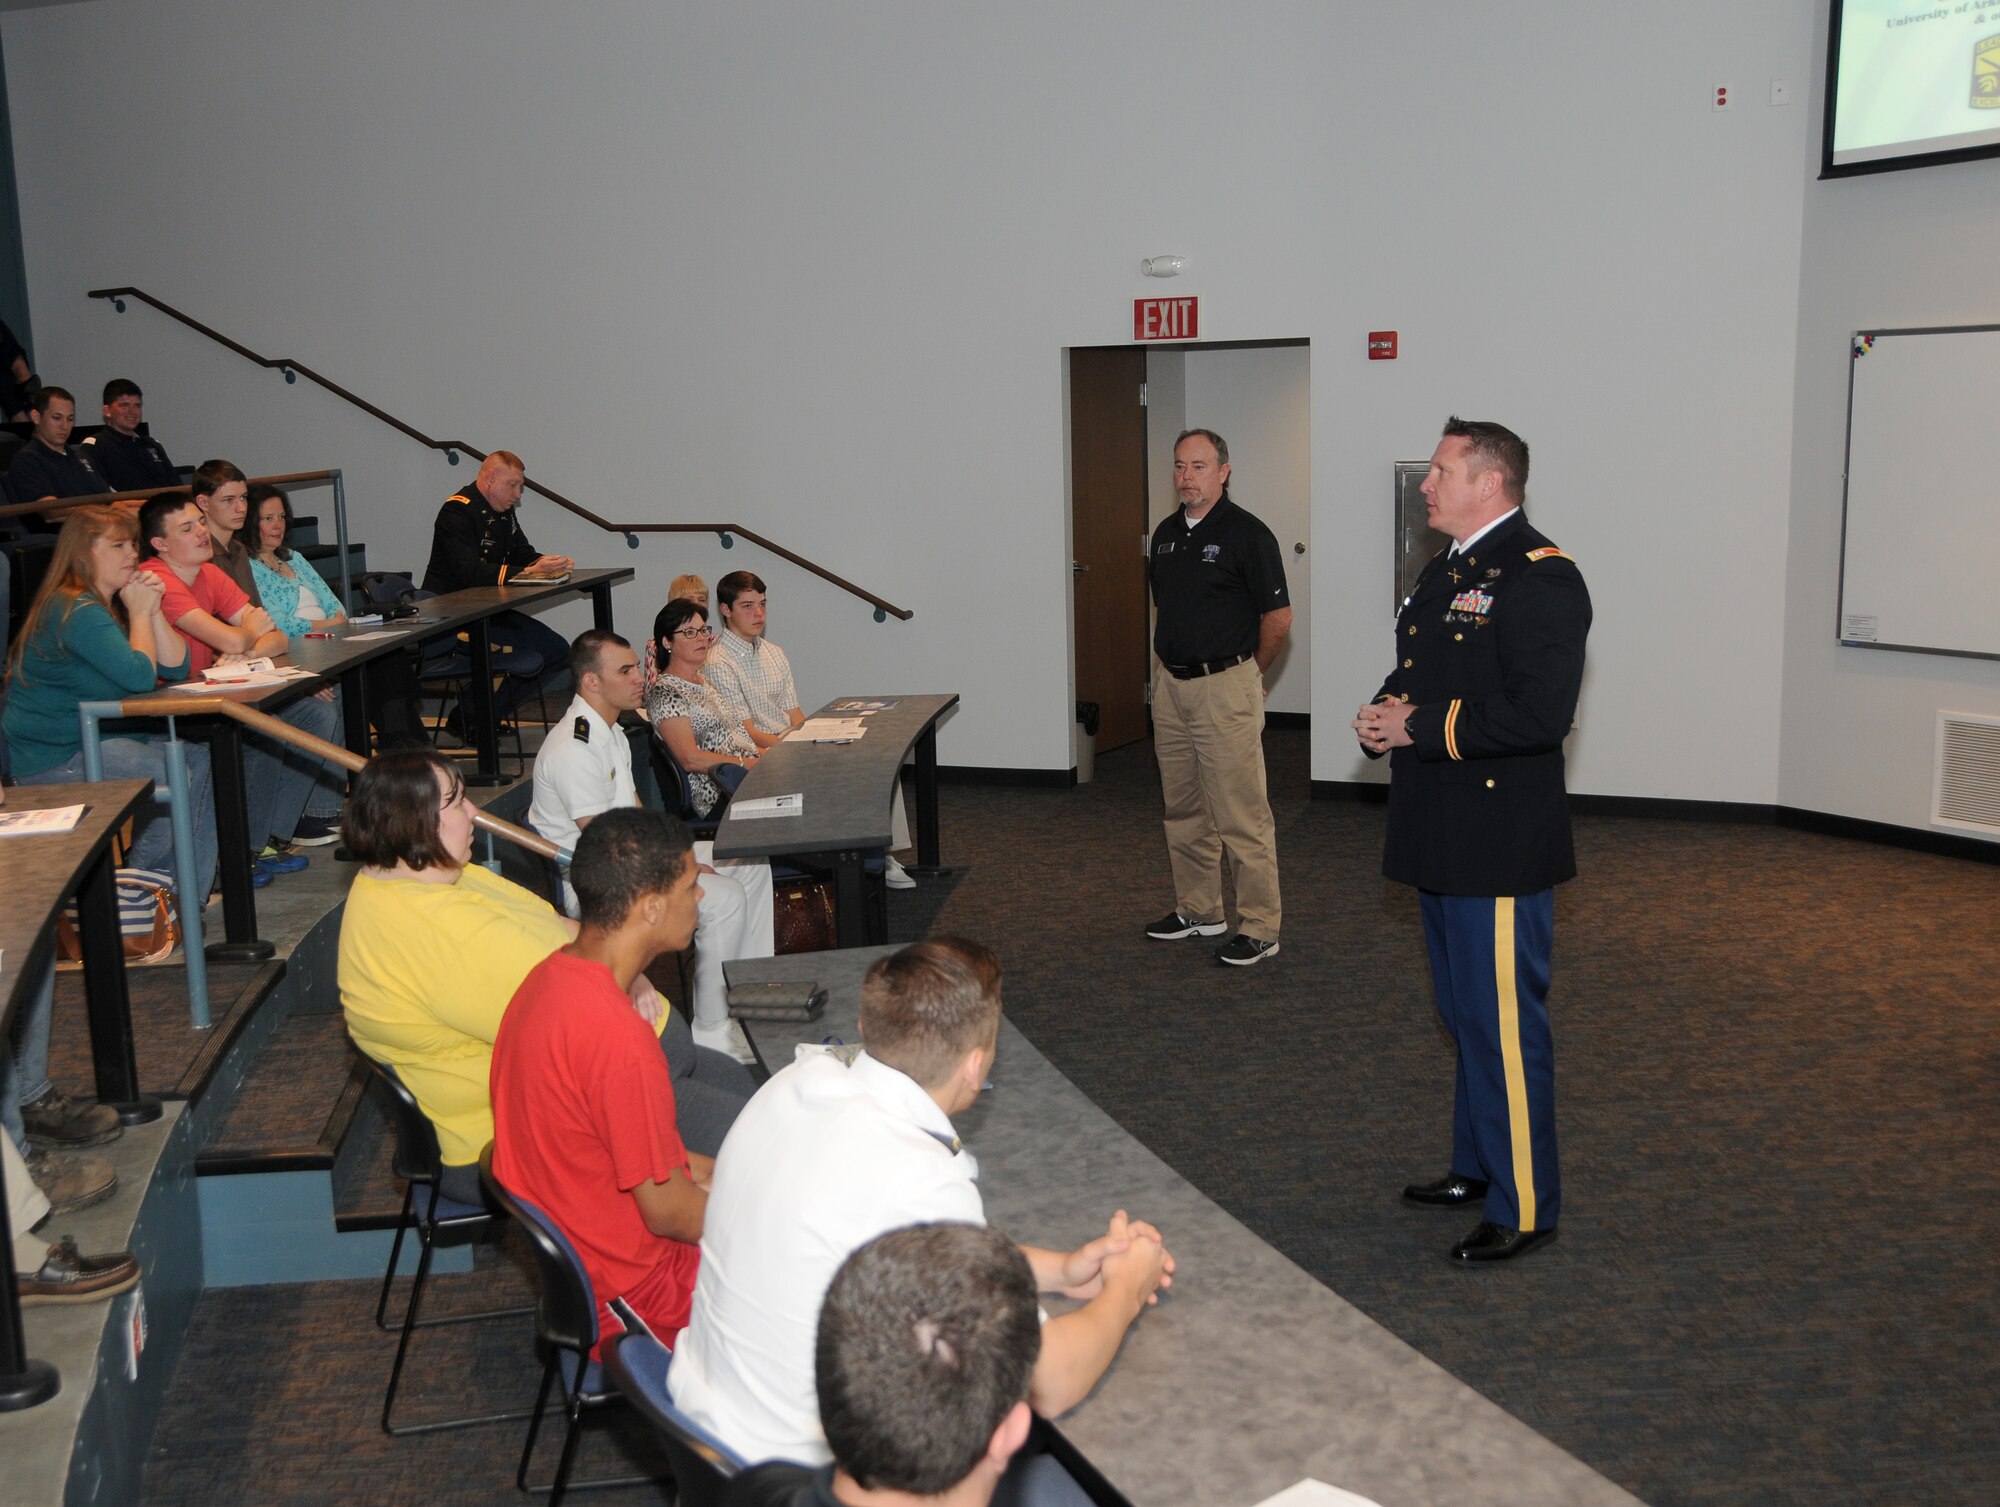 U.S. Army Capt. Eric Ashmore, a military science instructor at the University of Central Arkansas’ Reserve Officers Training Corps, speaks during Academy day with Arkansas youth interested in attending a military academy at Ebbing Air National Guard Base, Fort Smith, Ark., April 11, 2015. (U.S. Air National Guard photo by Senior Airman Cody Martin/released)